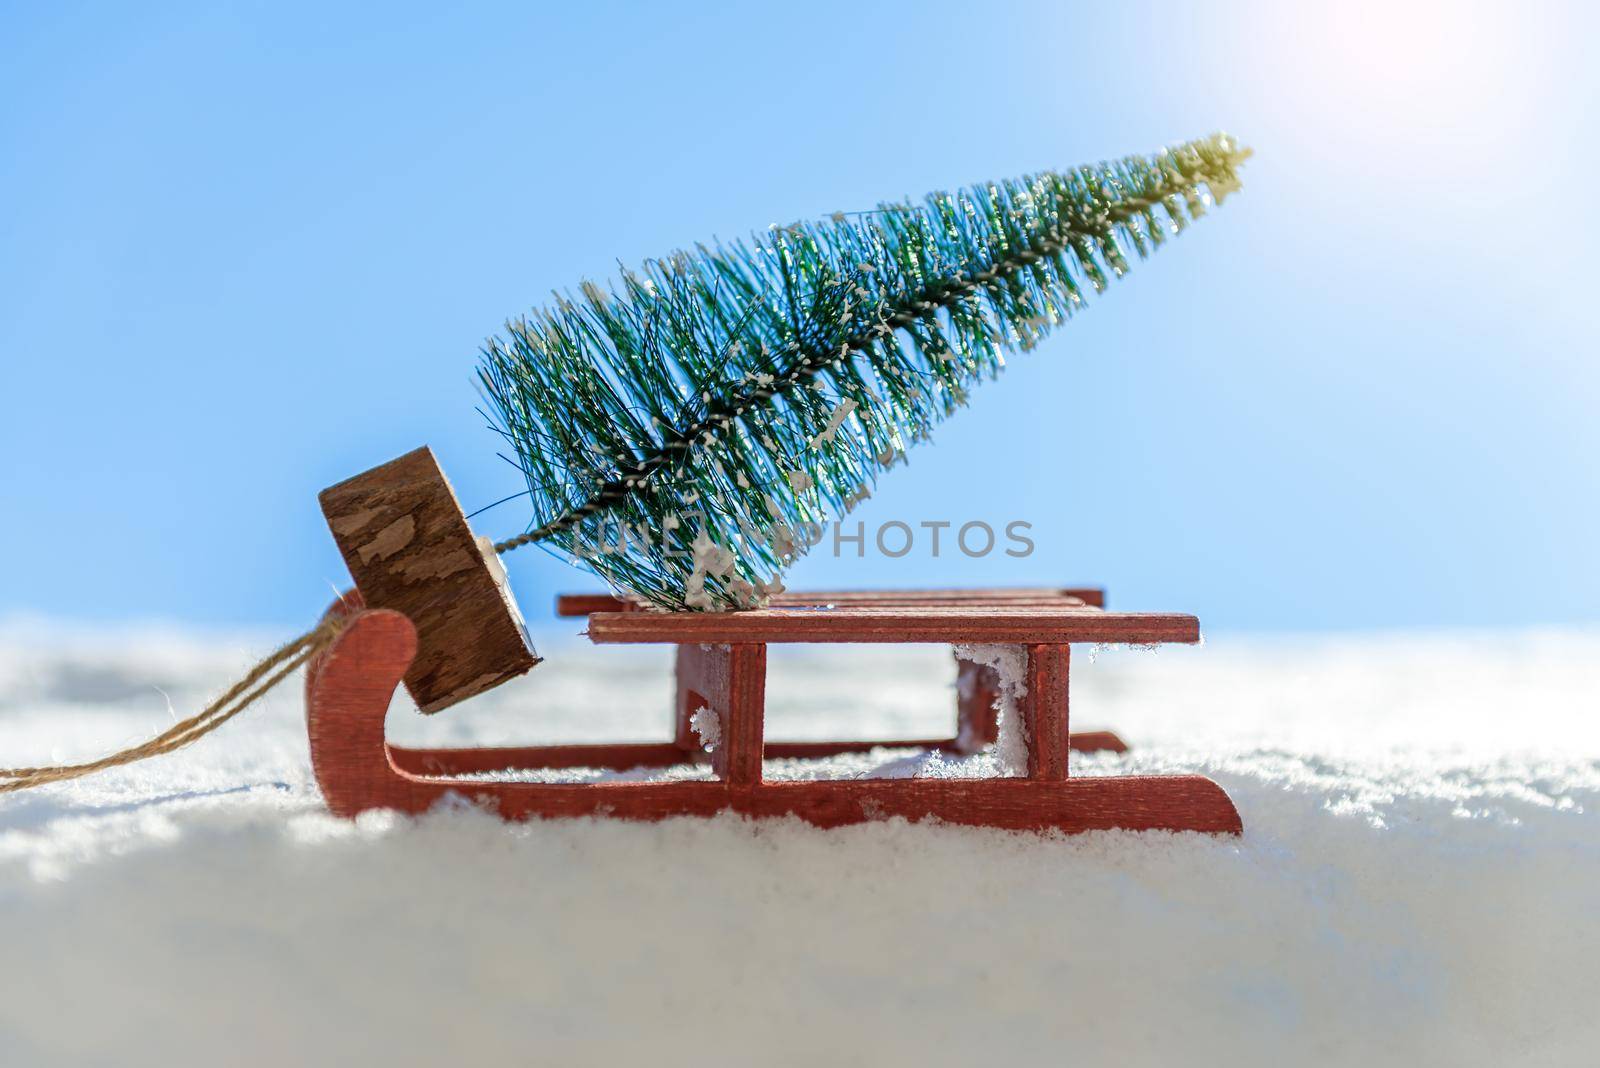 Red sleigh carrying a small Christmas tree in winter